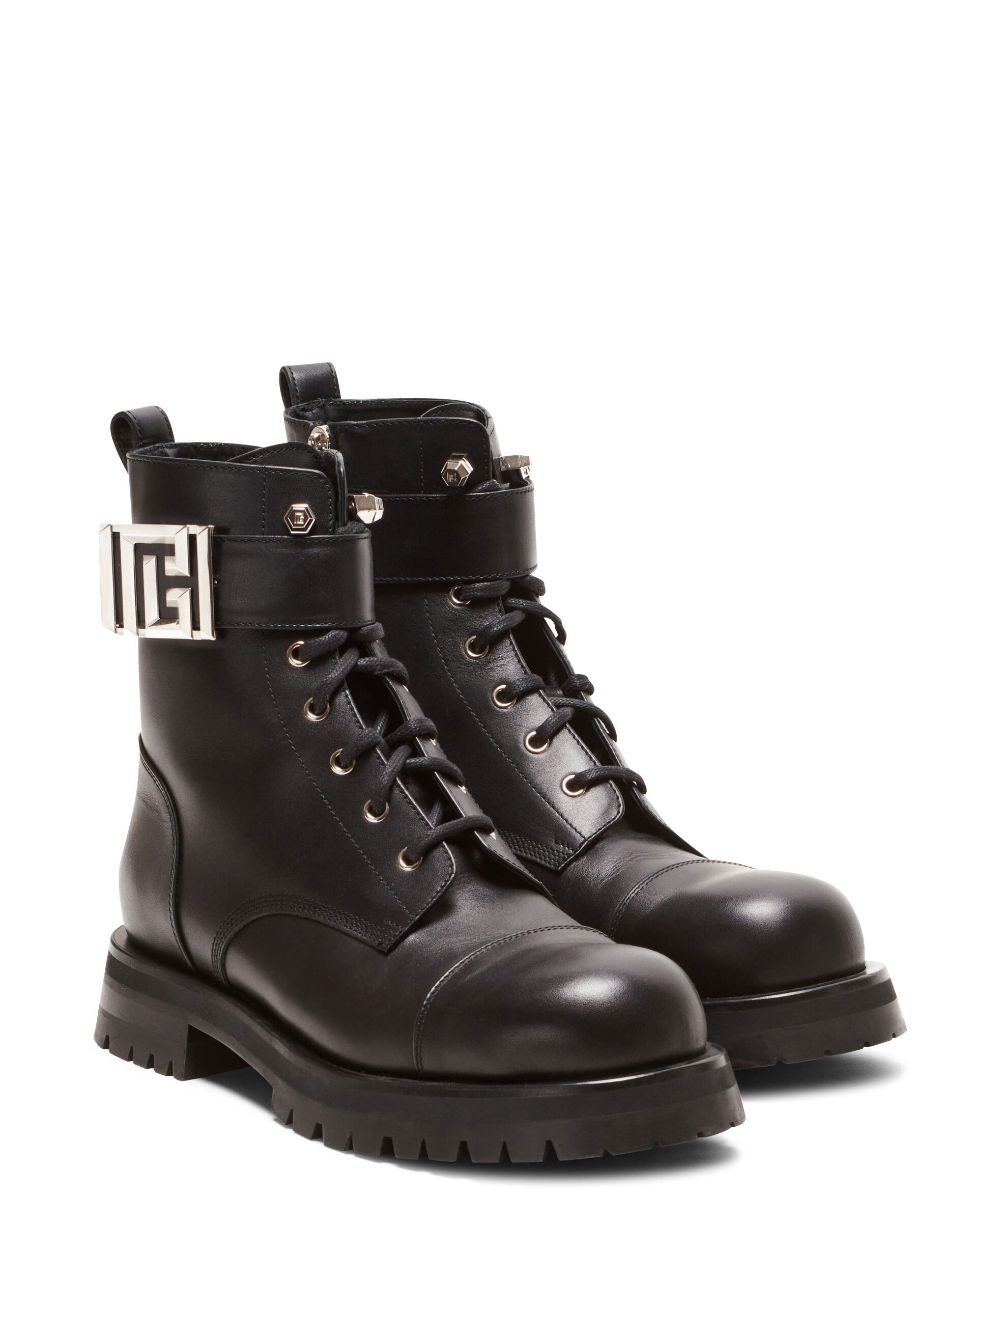 Charlie leather combat boots - 2